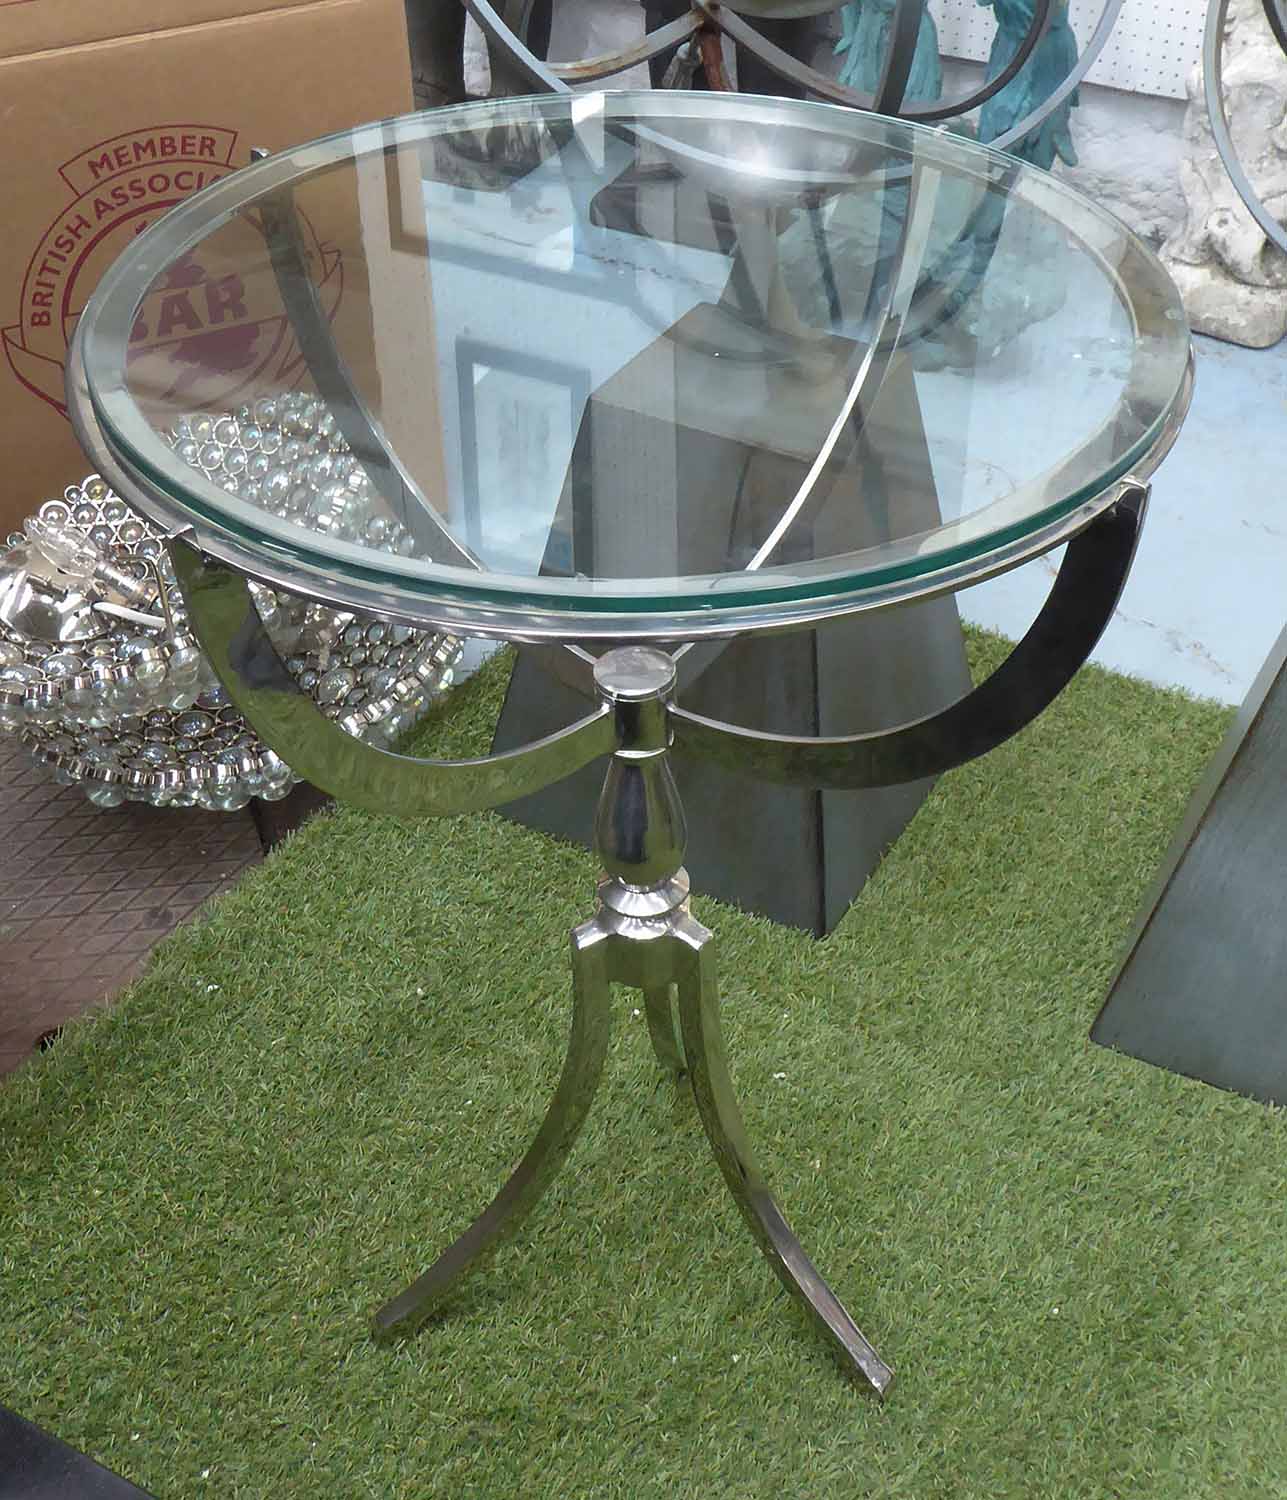 SIDE TABLE, glass top, metal frame, polished on triform supports, 65cm H x 50cm.